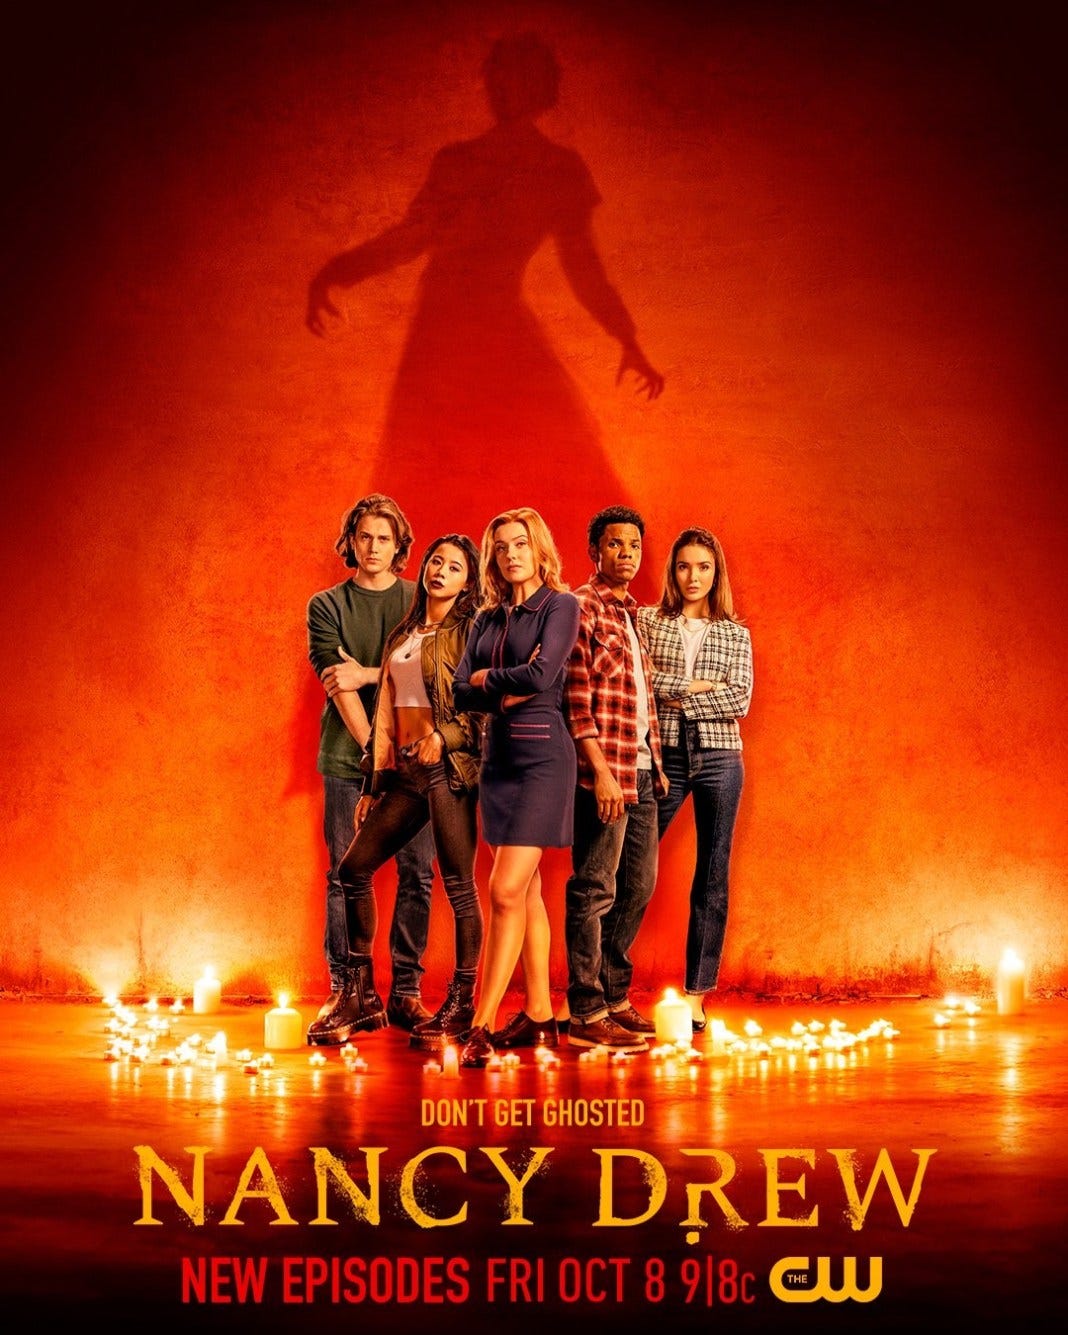 Nancy Drew Season 3 Promo Image: The Drew Crew stands in a candelit circle. A shadowy figure stands behind them as if a puppet master.